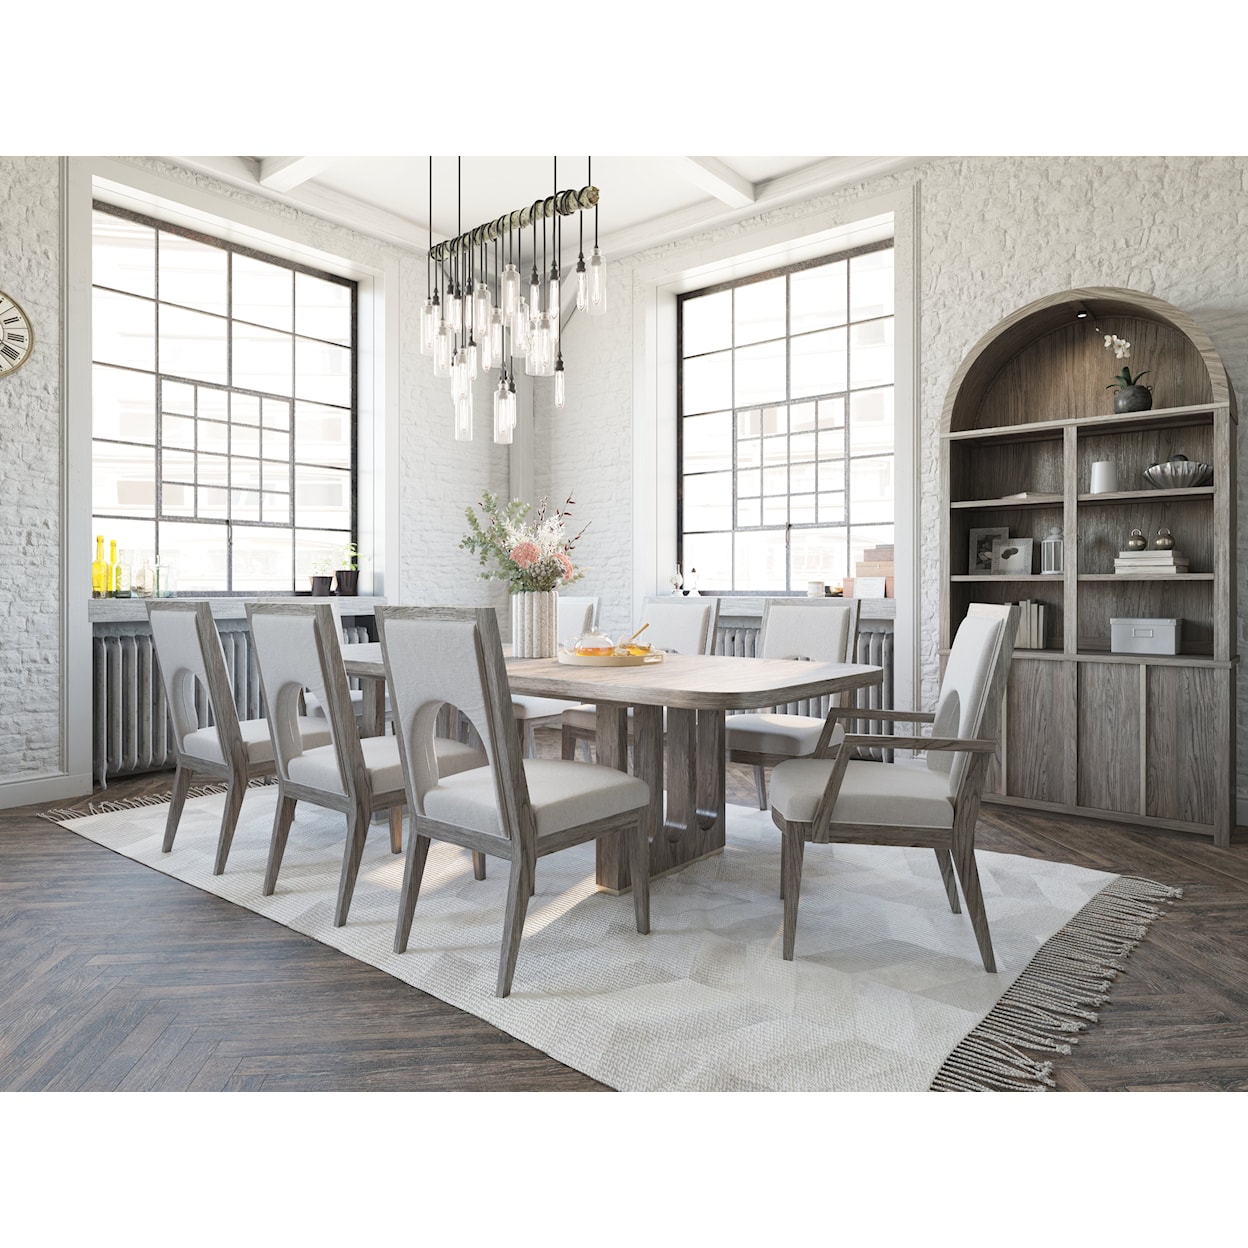 A.R.T. Furniture Inc Vault Dining Table